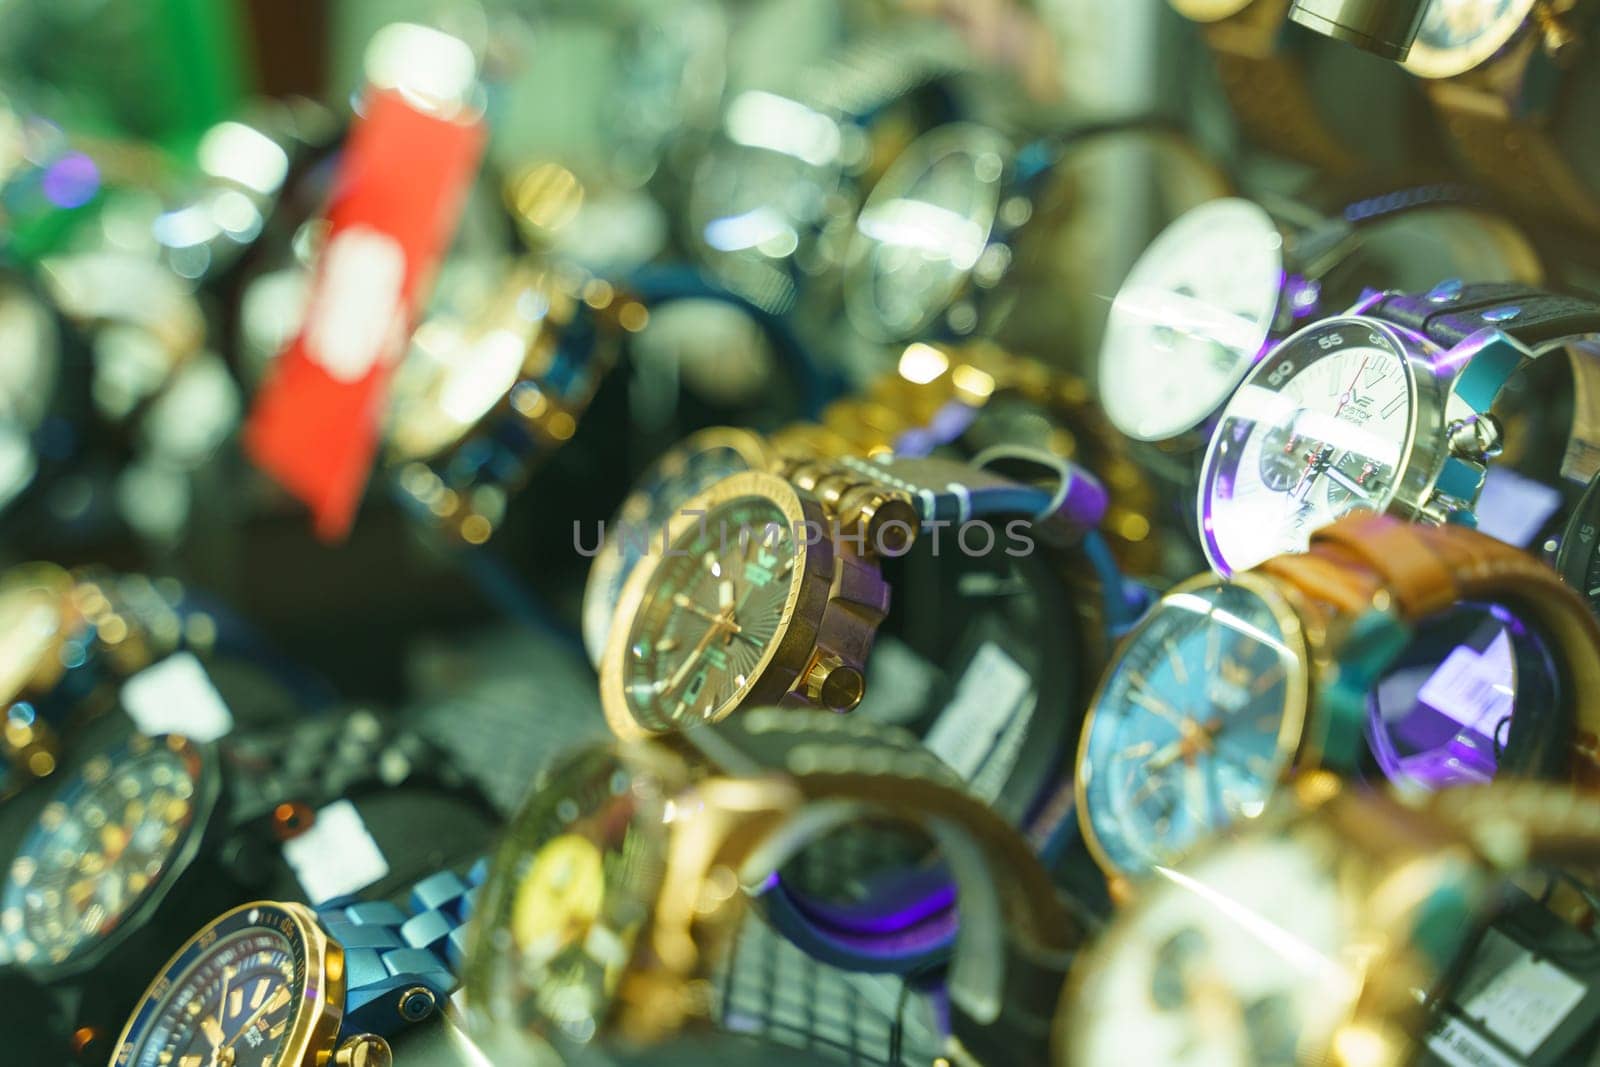 Klaipeda, Lithuania - August 10, 2023: A collection of various watches, each displaying a different color yet all in a bunch together.